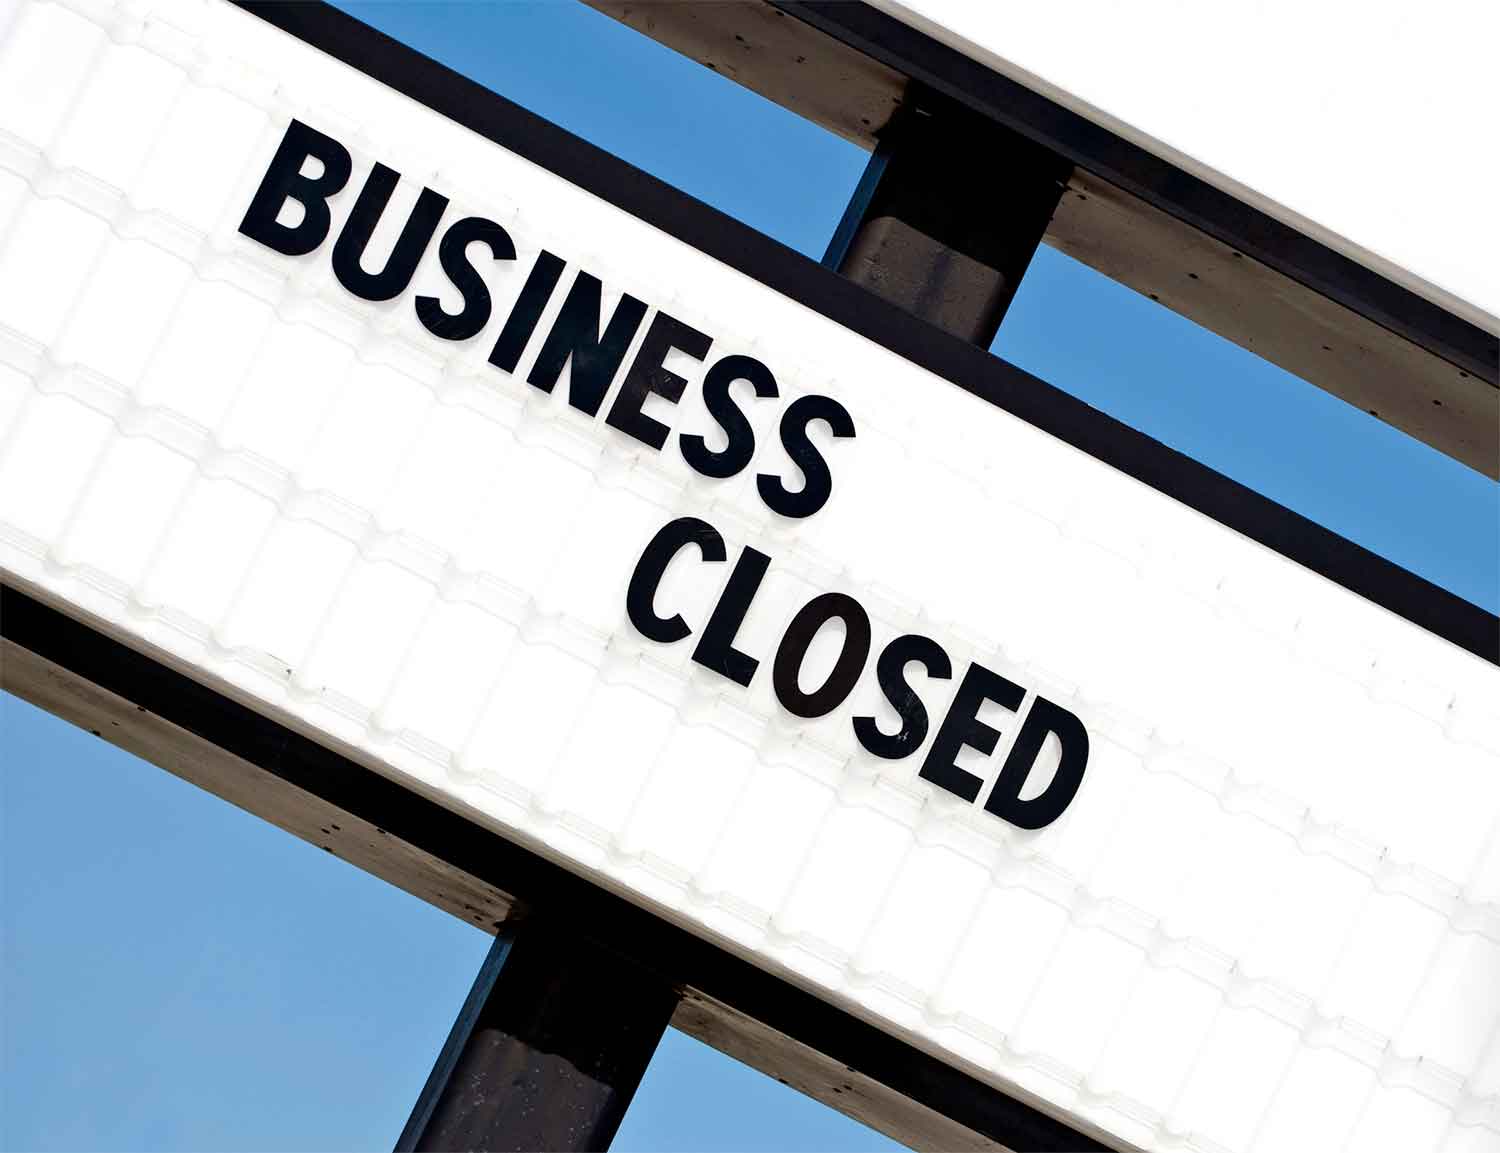 Out of Business - Why?